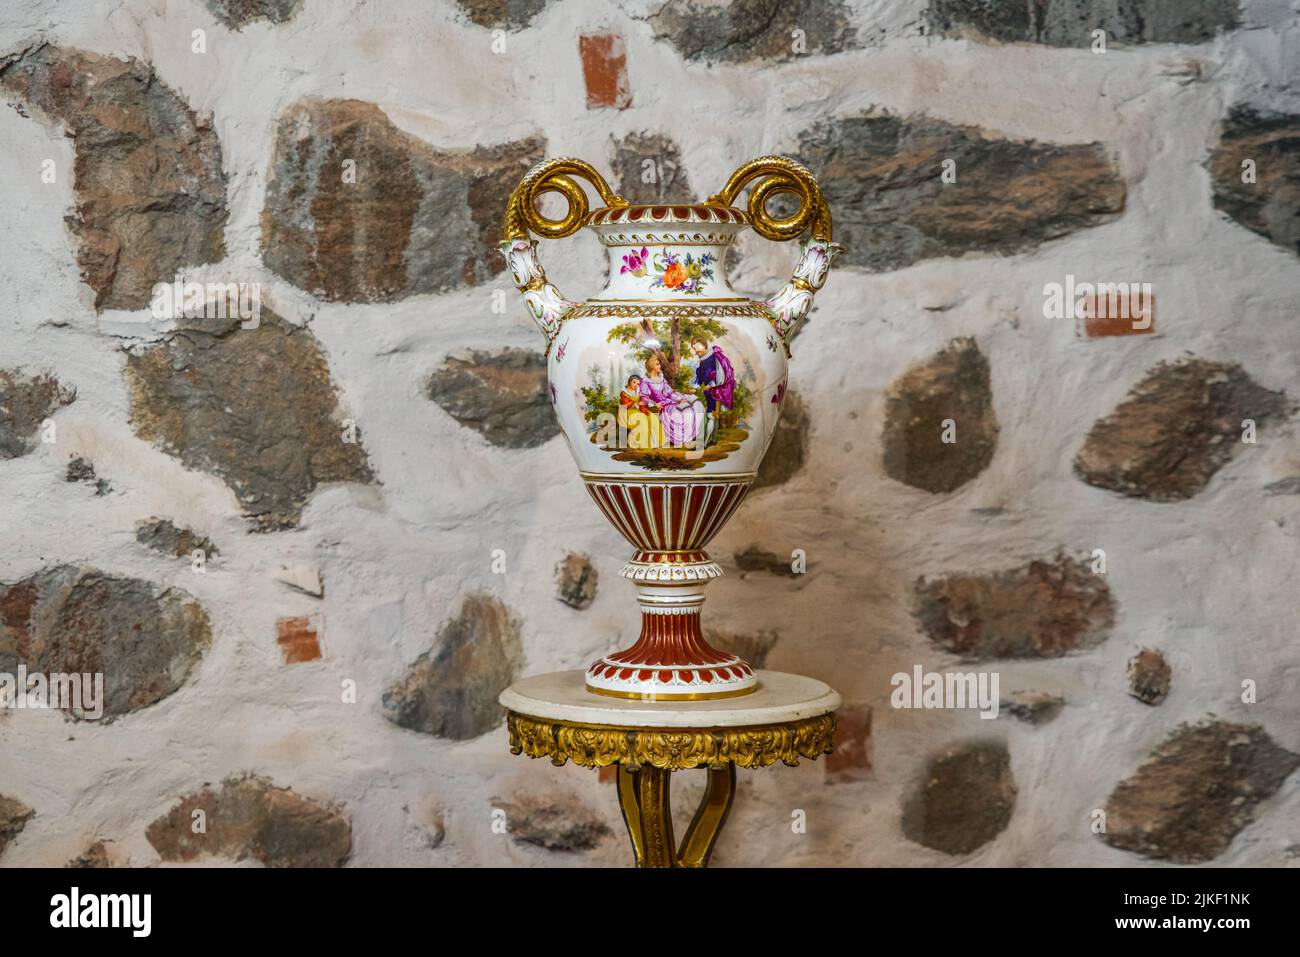 Antique old vase with painting on a stone background Stock Photo